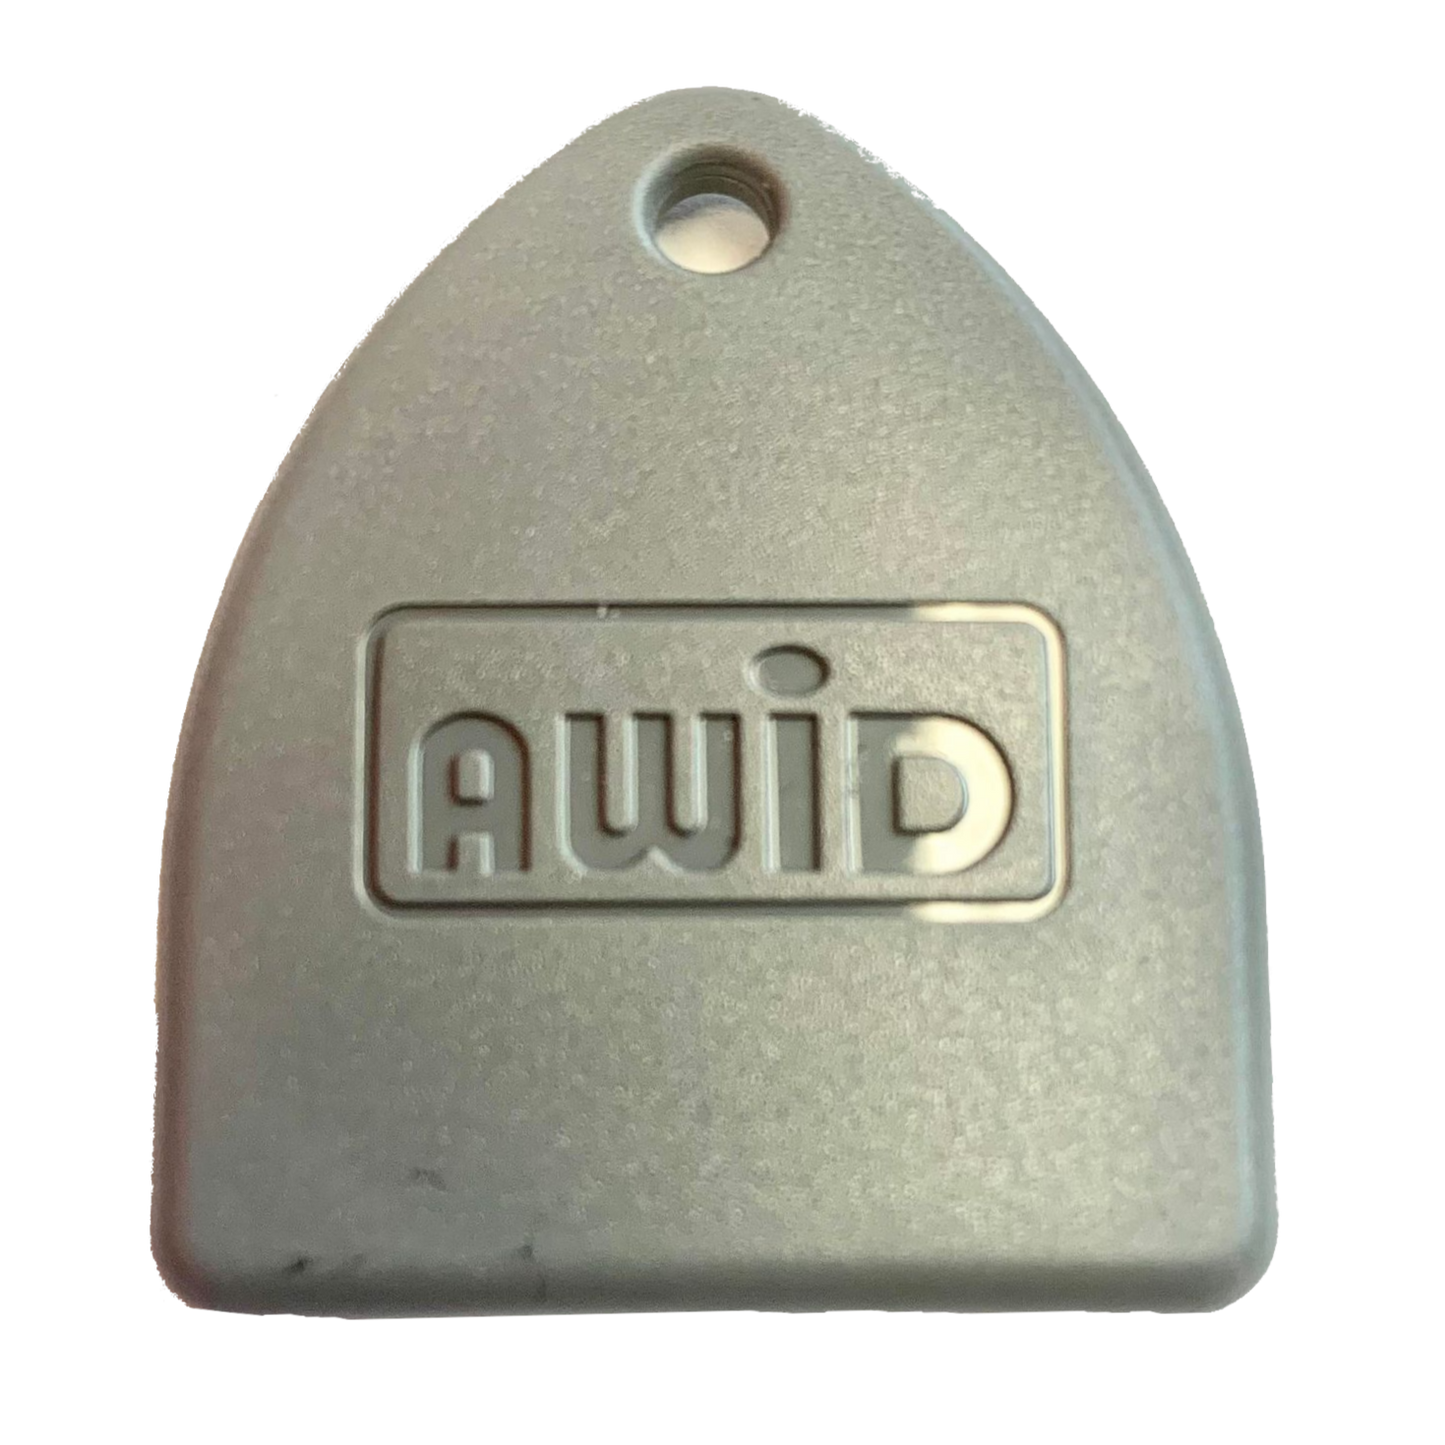 awid new version awid fob copy serial number picture awid old awid key fob clone no mail in copy by picture picture upload copy awid system